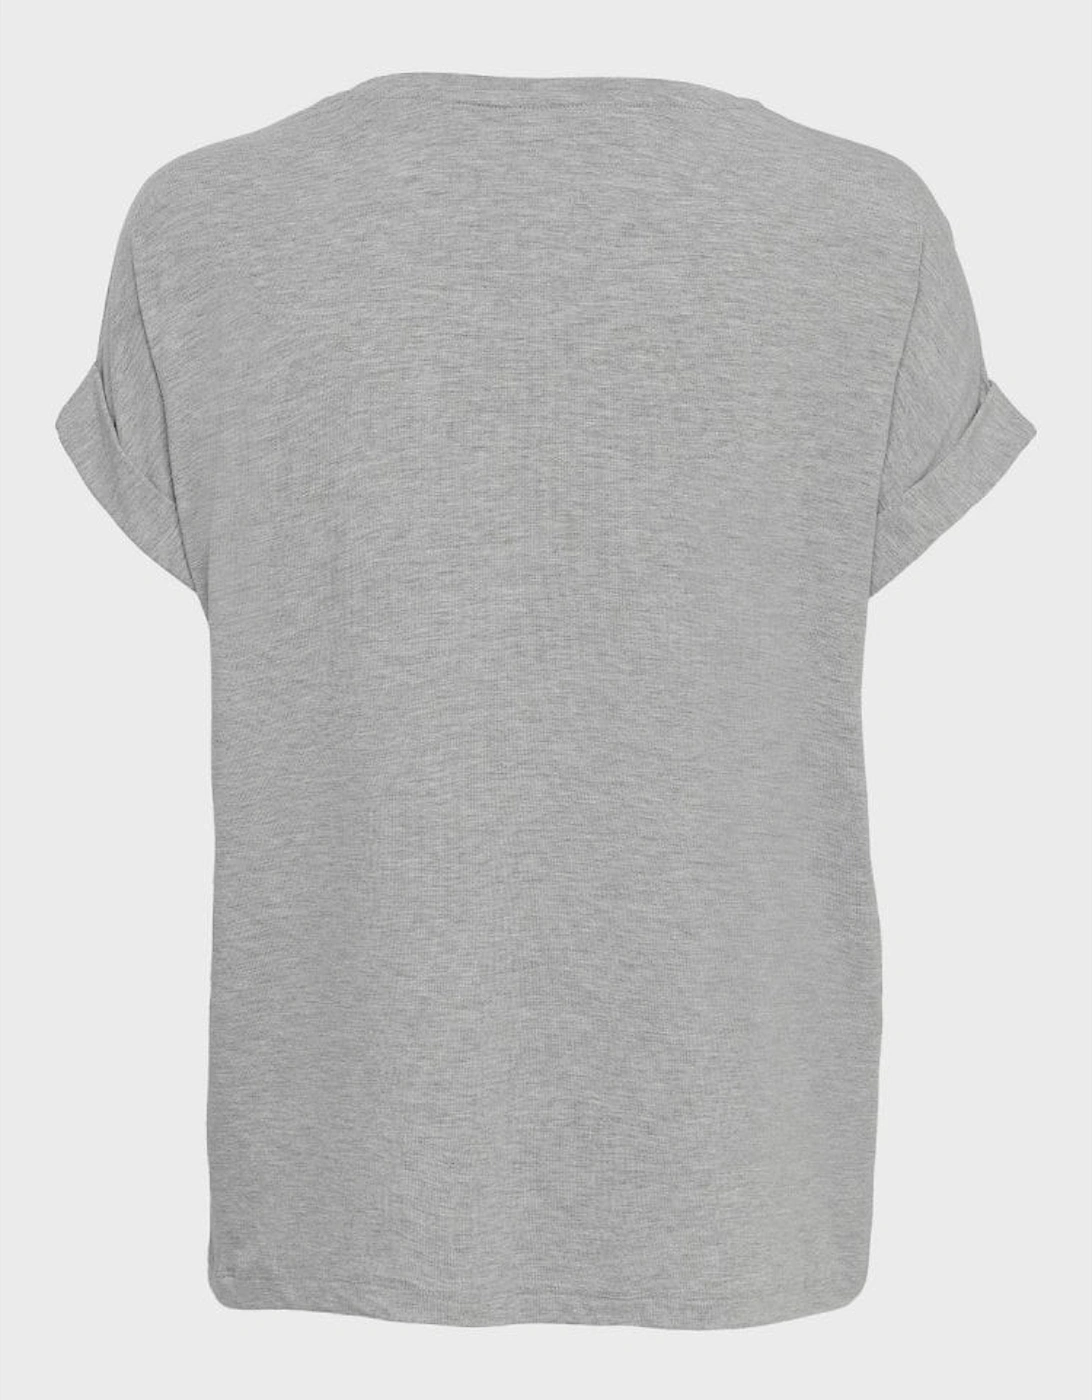 Oster Loose Fit T-Shirt - Grey